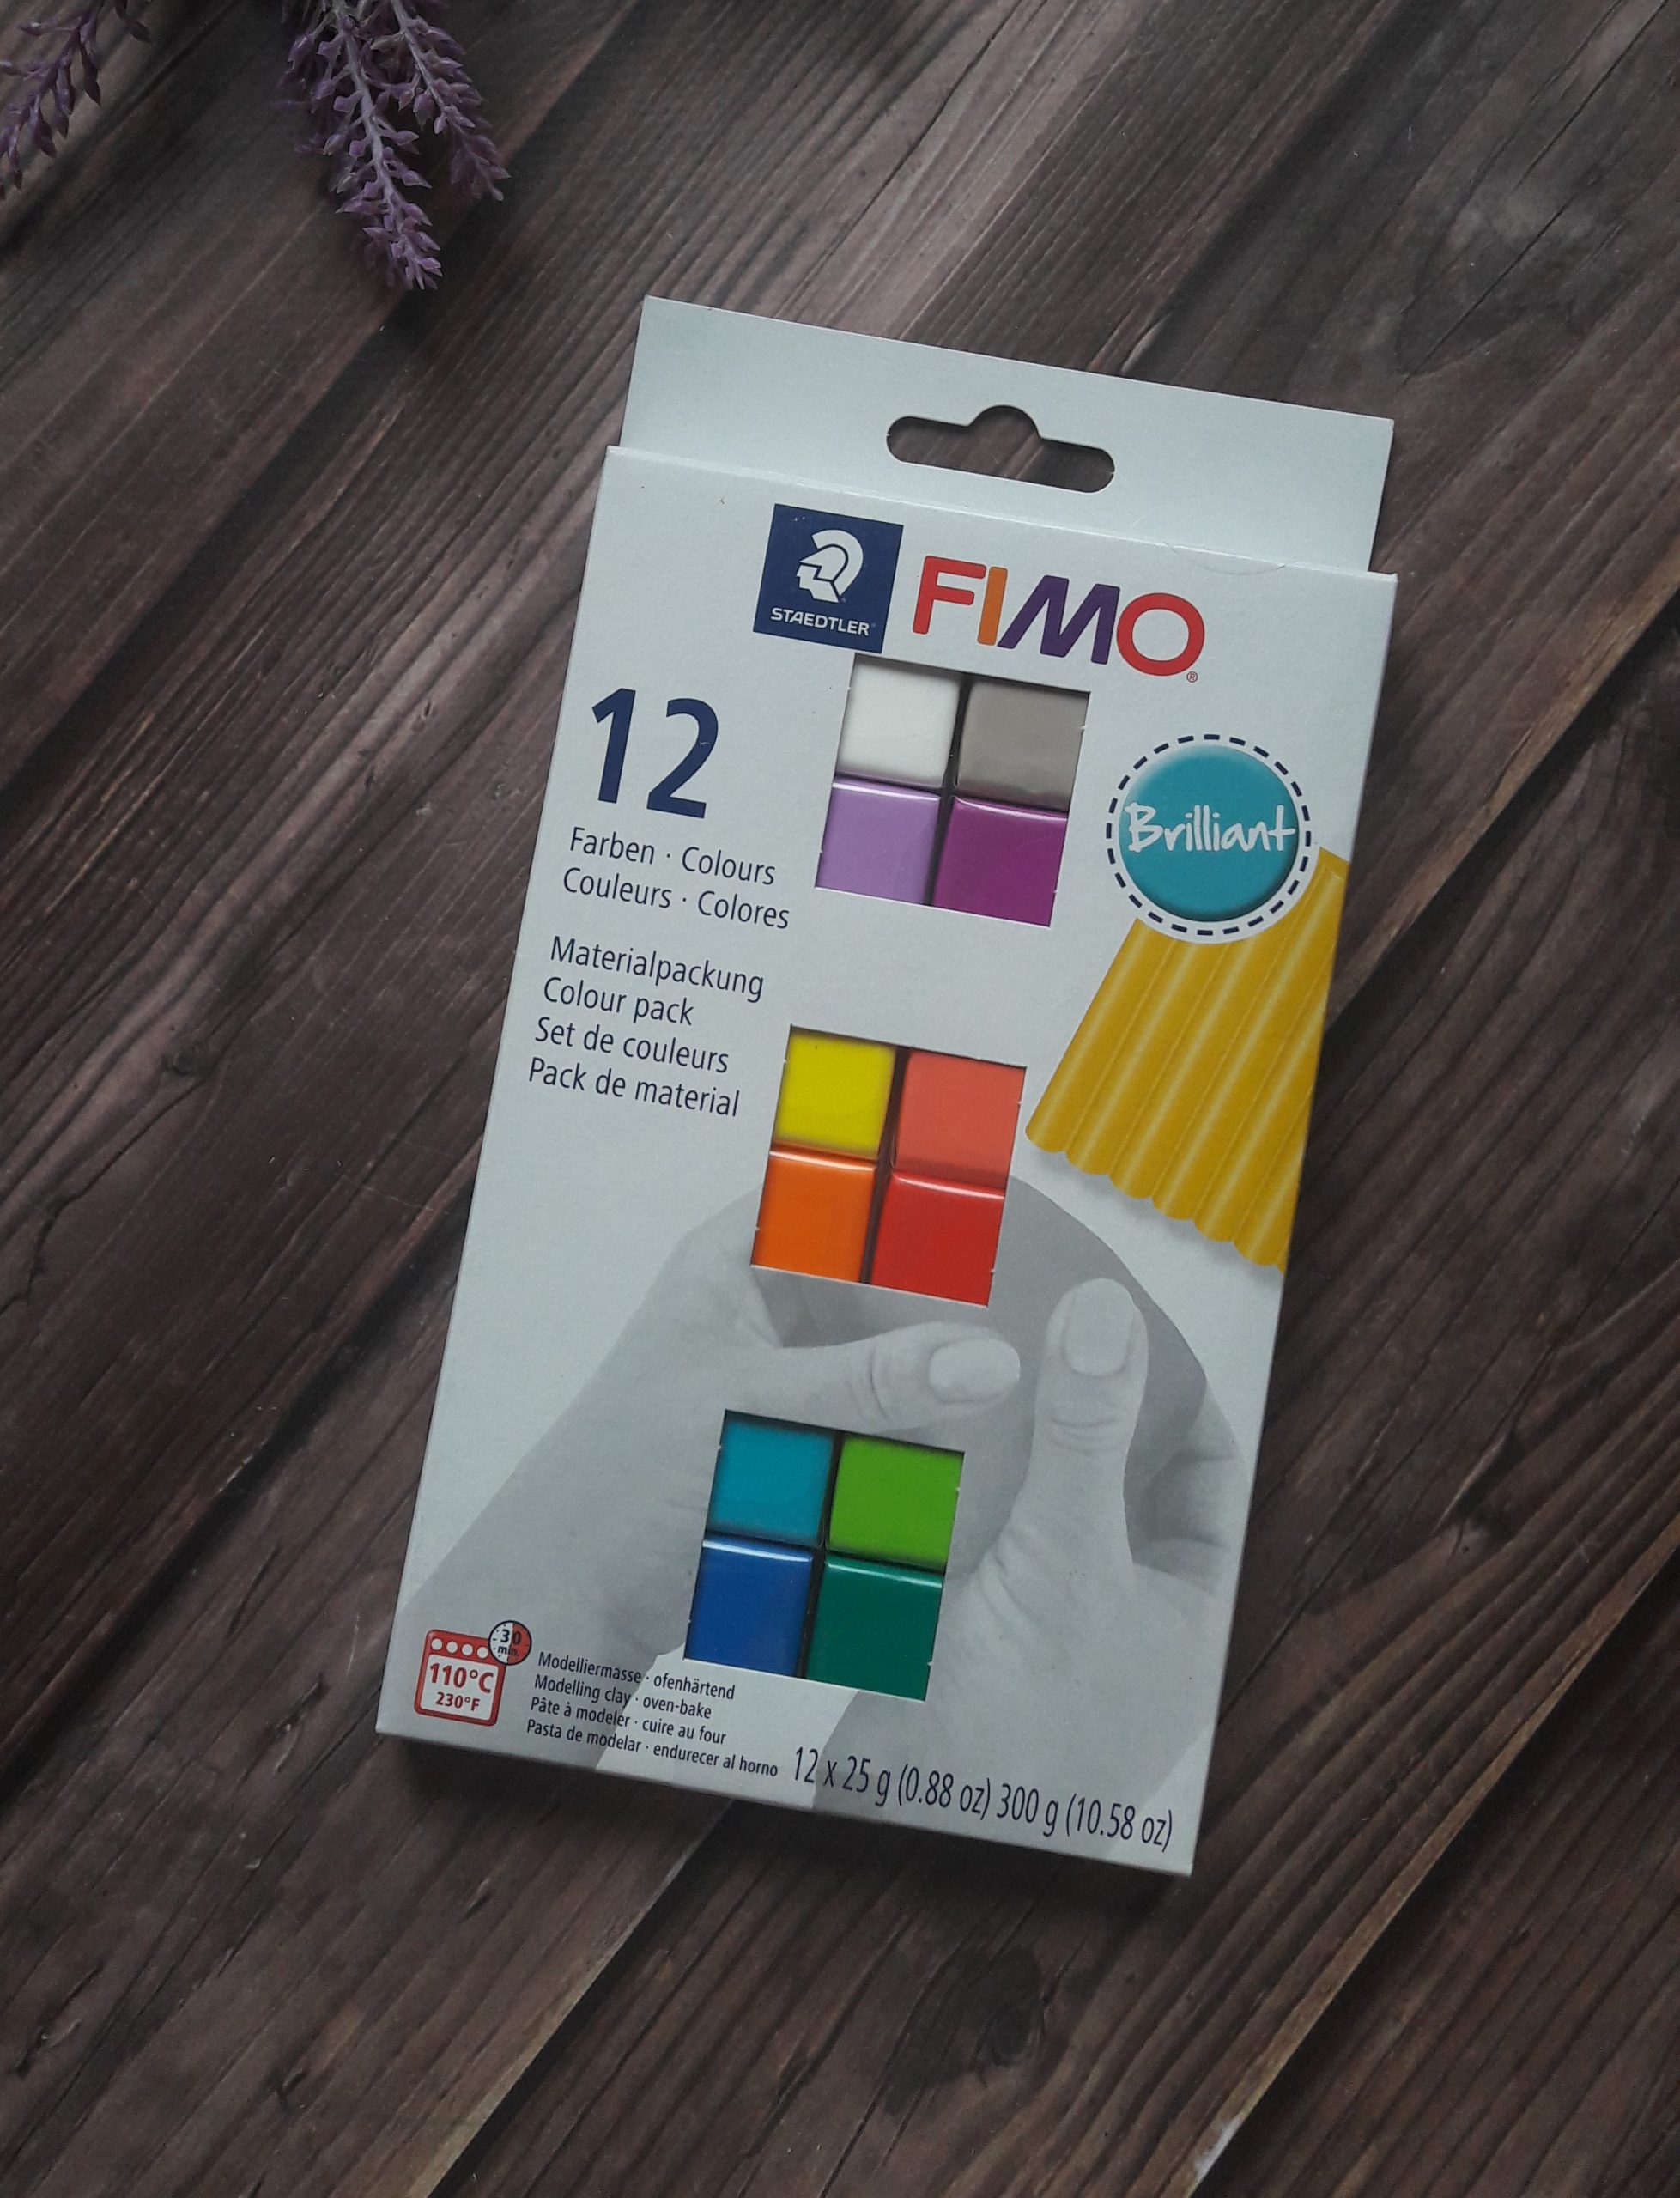 Staedtler FIMO Soft Modelling Clay 12 x 25 g Brilliant colours